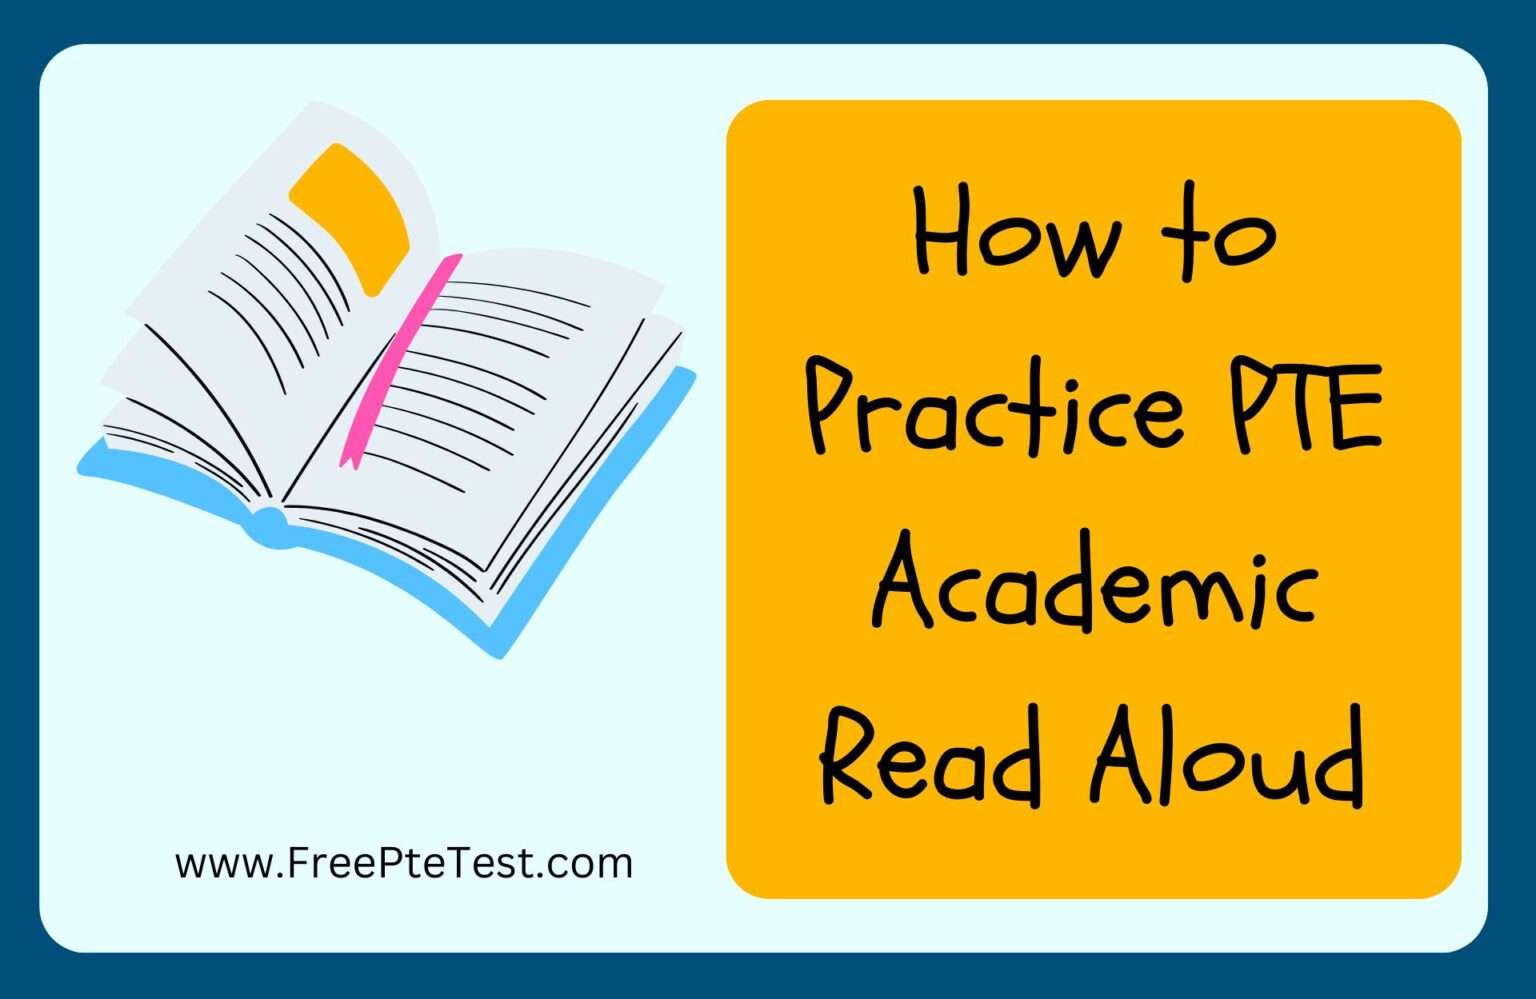 PTE Academic Read Aloud – How to attempt